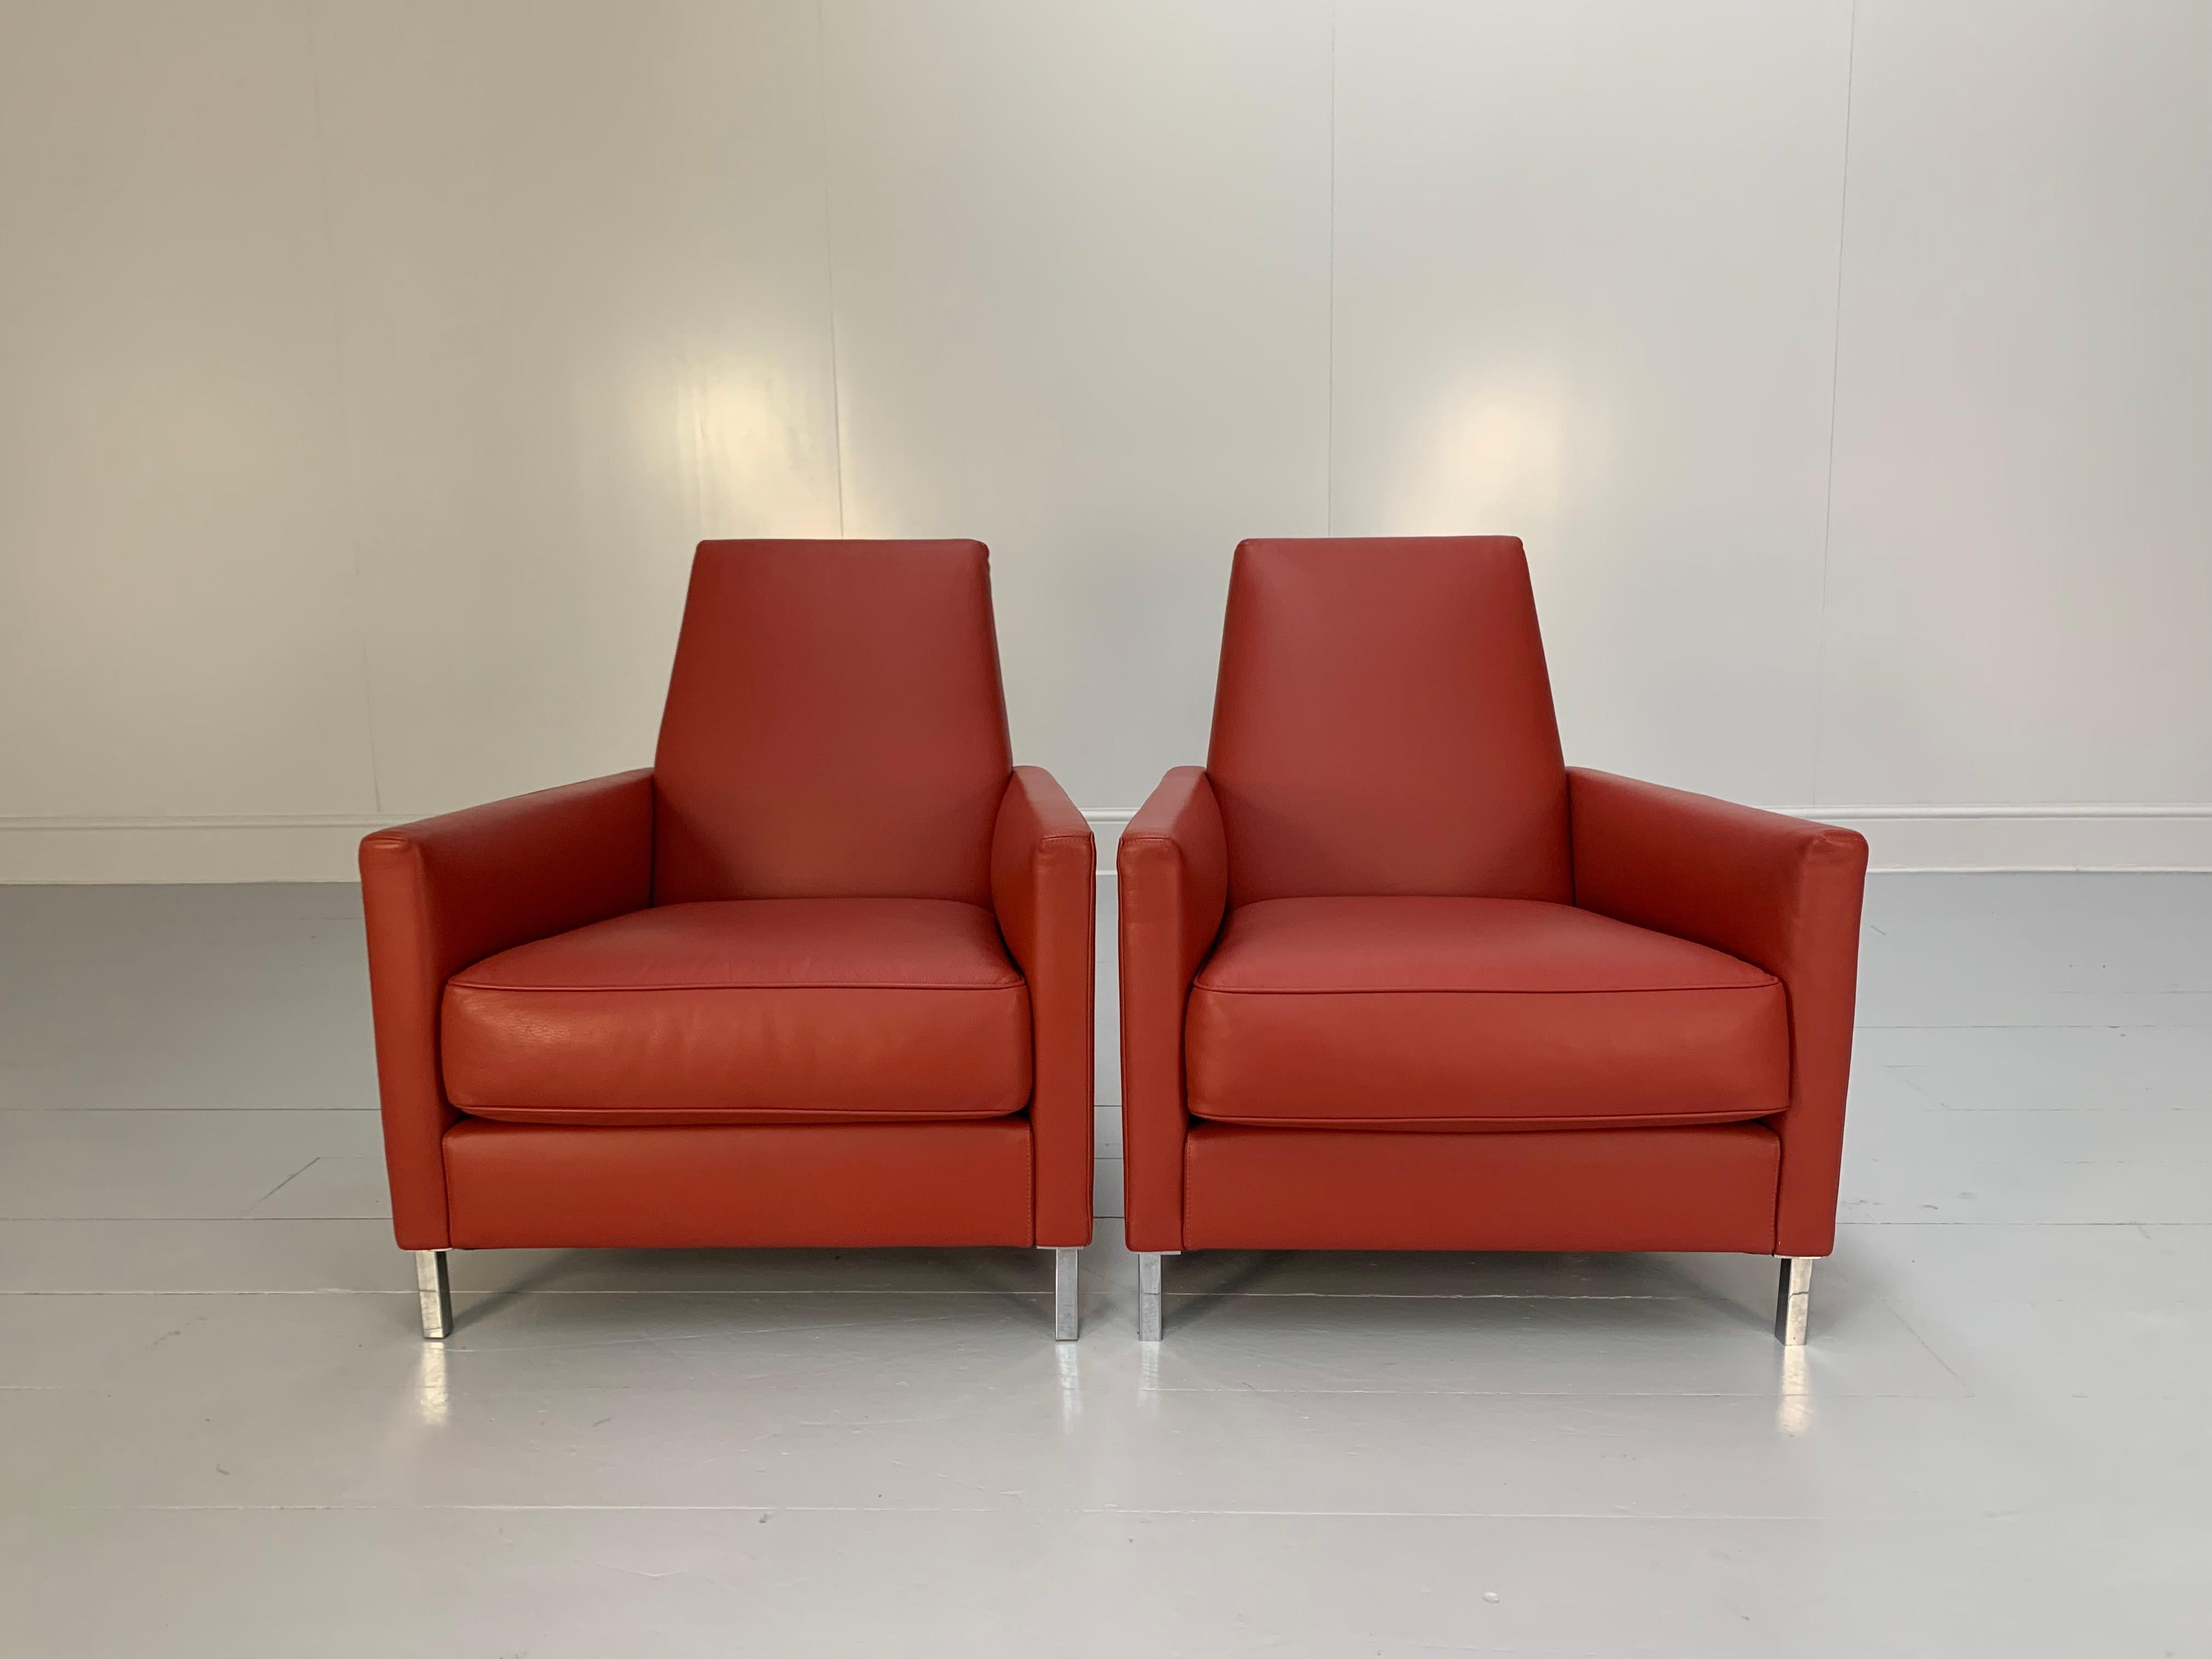 Moroso “Hyde Park” Sofa & 2 Armchair Suite, in Red “Pelle” Leather For Sale 4